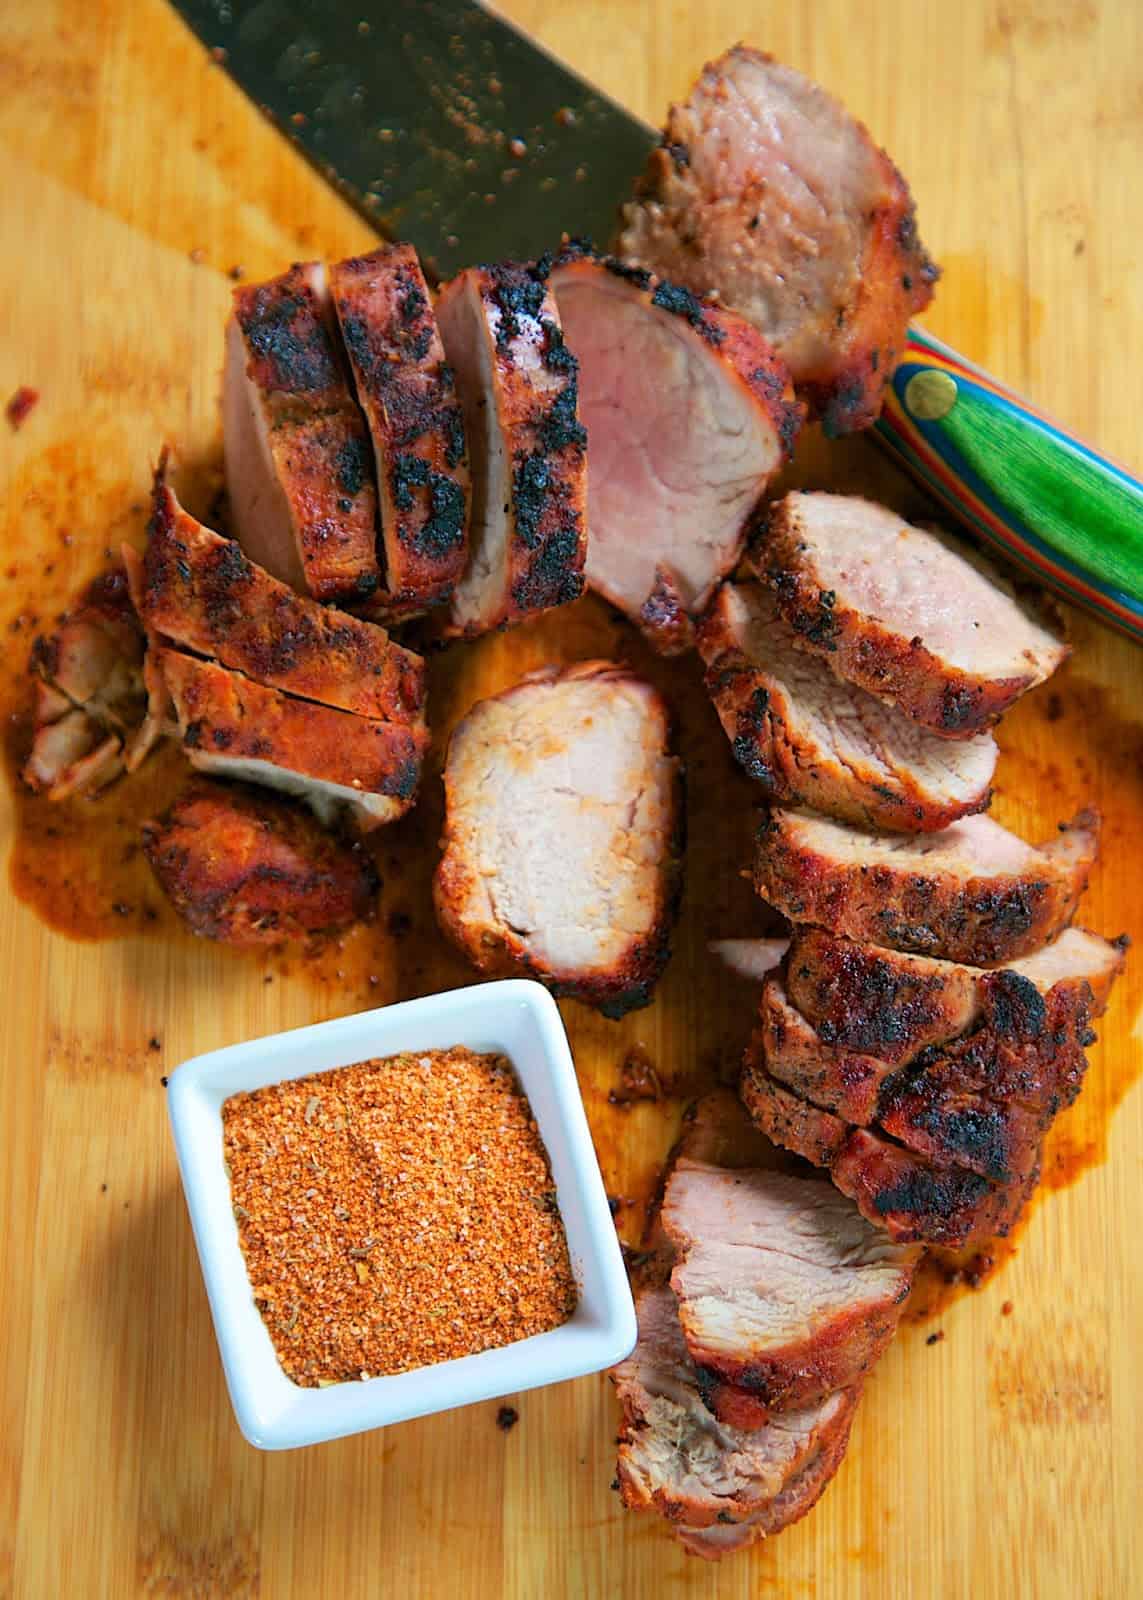 BBQ Pork Tenderloin Recipe - pork tenderloin seasoned with a homemade BBQ rub and grilled. Tasted SO good! Great on its own or on a bun with BBQ sauce!